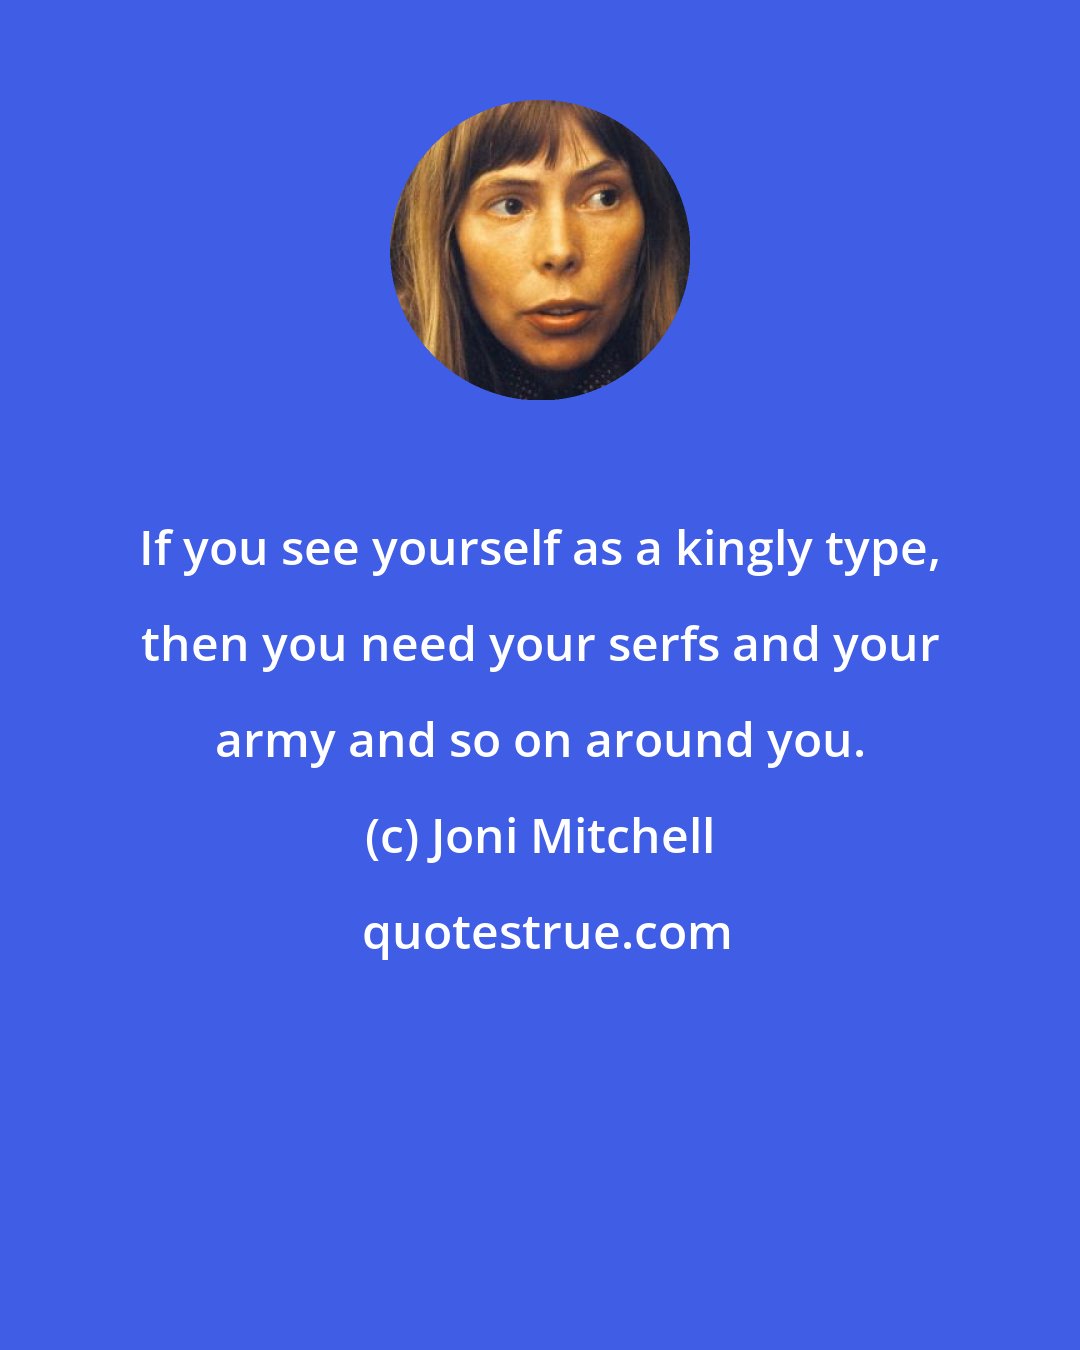 Joni Mitchell: If you see yourself as a kingly type, then you need your serfs and your army and so on around you.